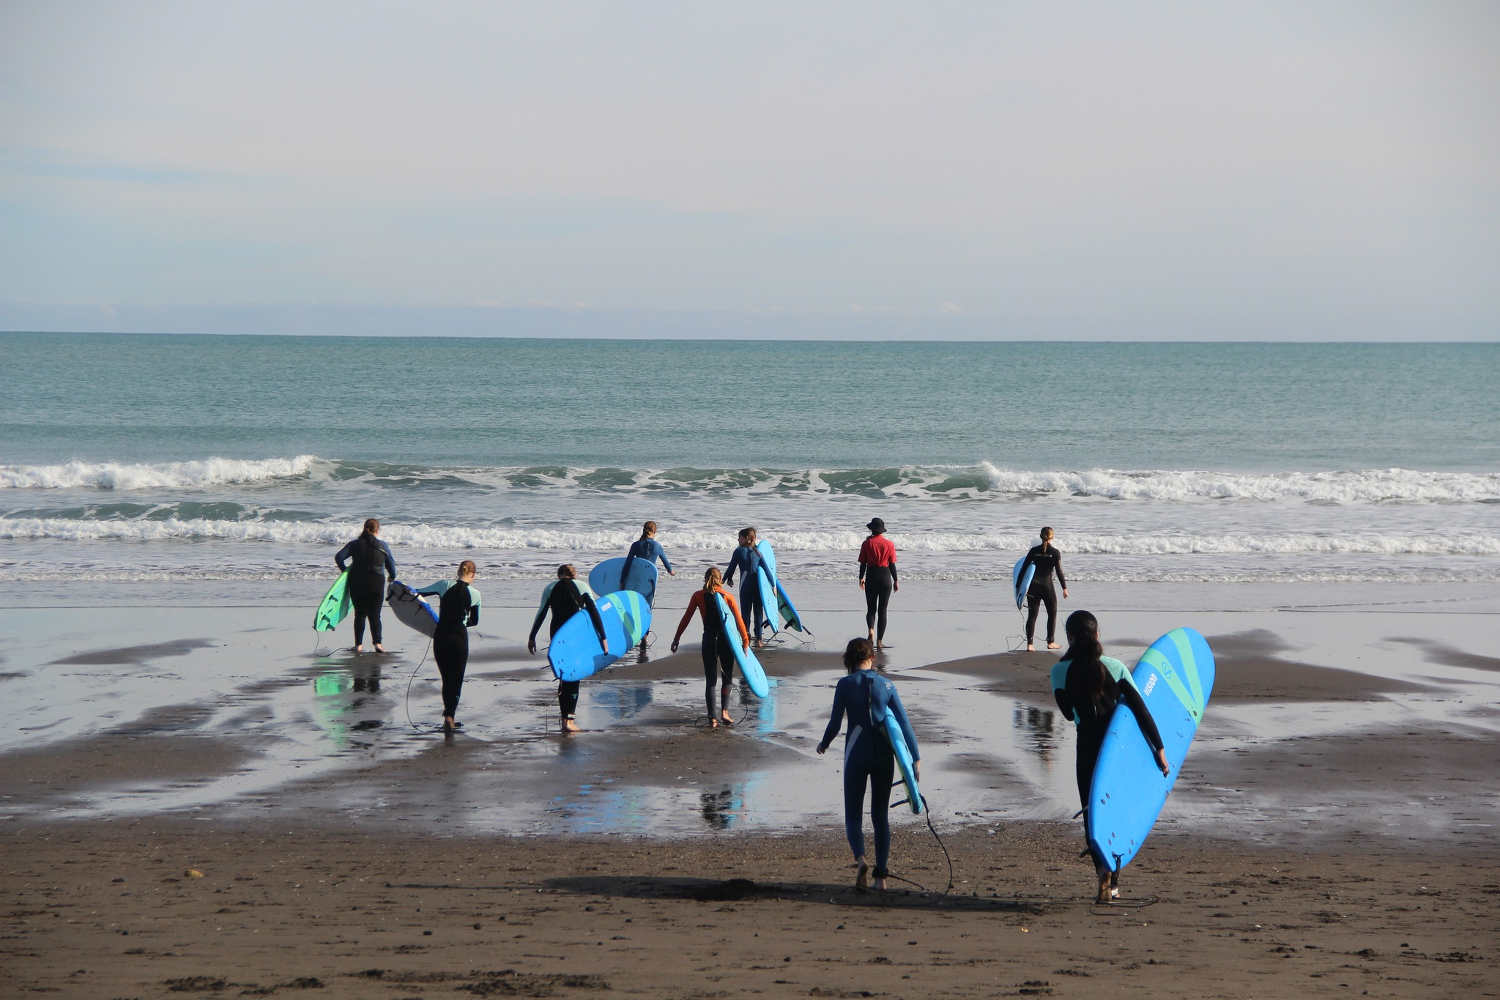 @New Plymouth Surf School